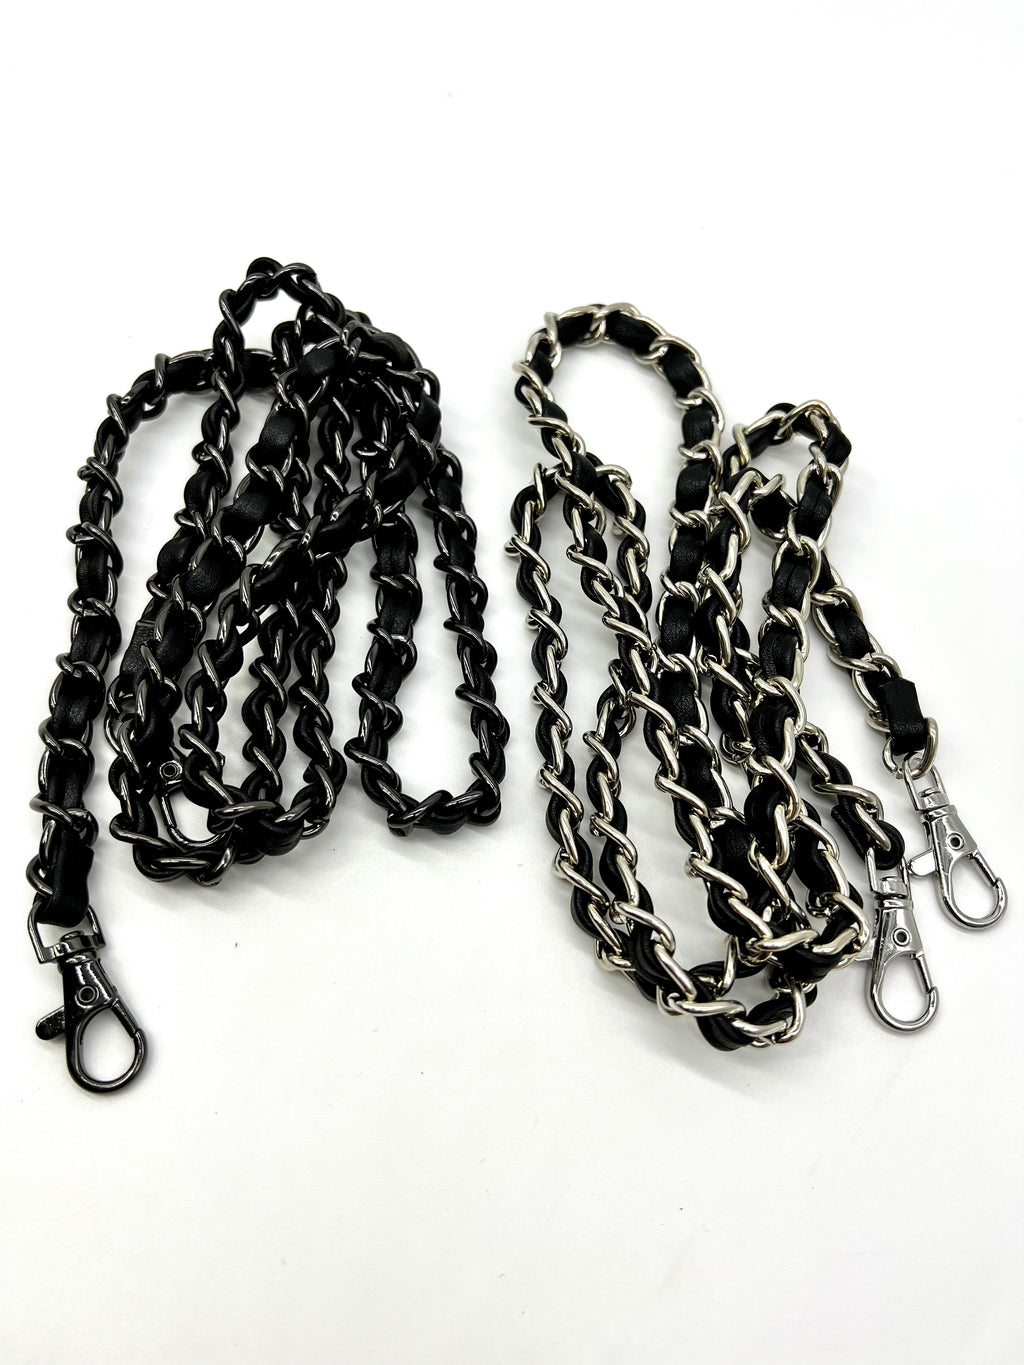 NEW Metal and Black Leather Purse Chain Straps